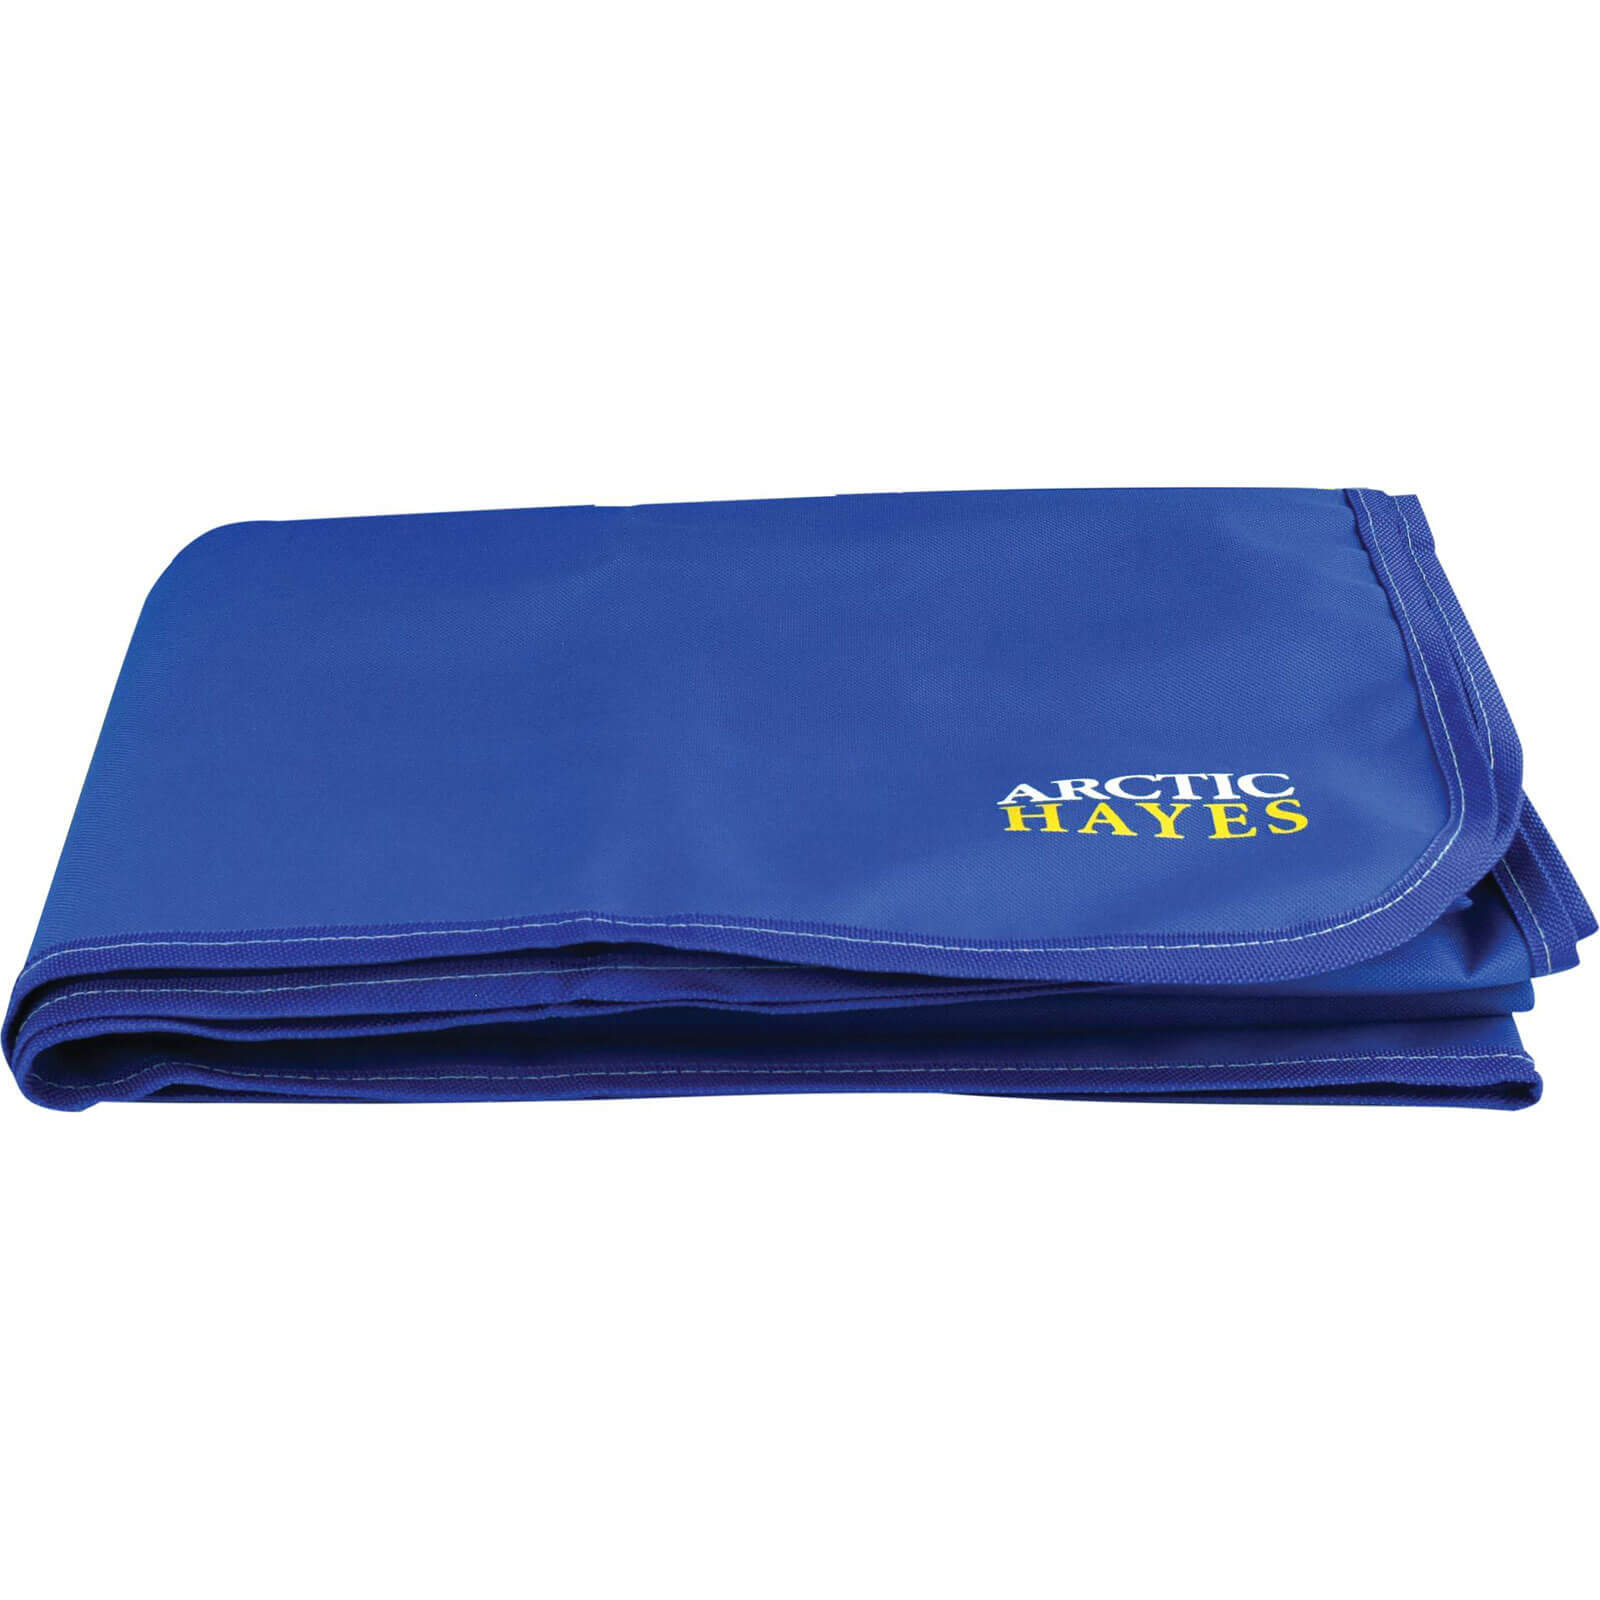 Image of Arctic Hayes Tradesmans Runner Work Mat and Storage Bag 3.2m 0.7m Pack of 1